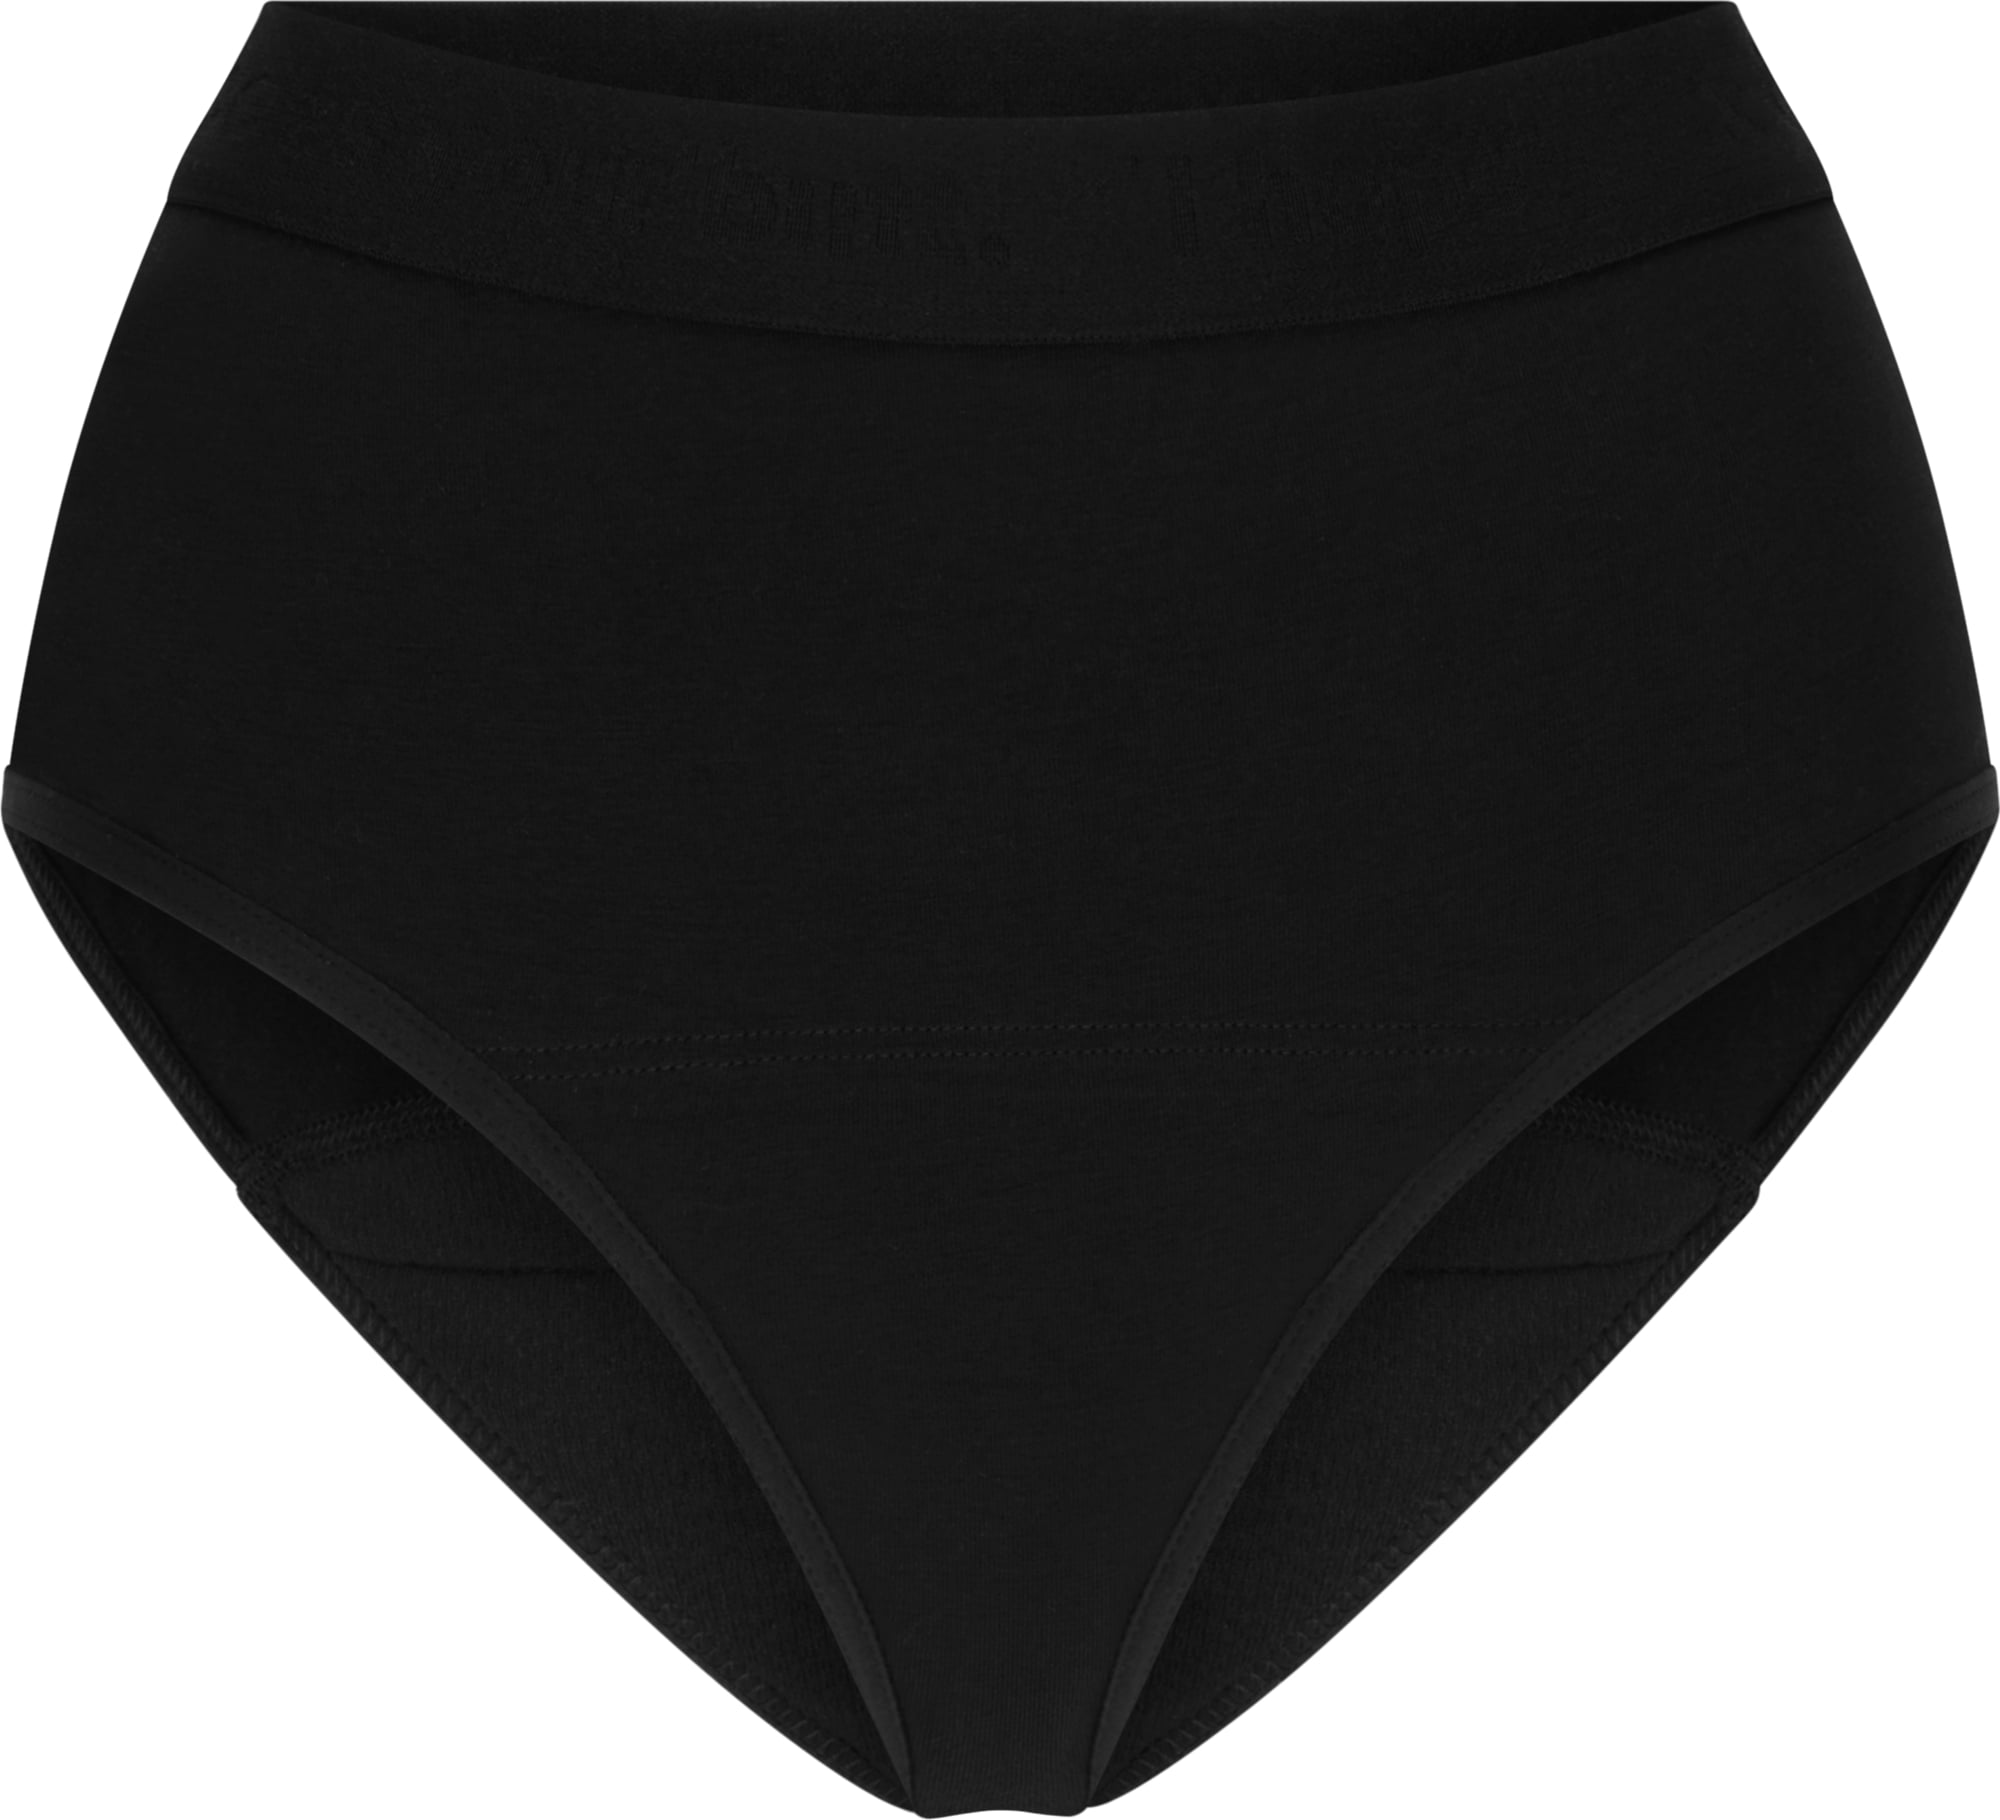 https://ec.nice-cdn.com/upload/image/product/large/default/the-female-company-period-underwear-hipster-basic-black-extra-strong-56-2044141-en.jpg